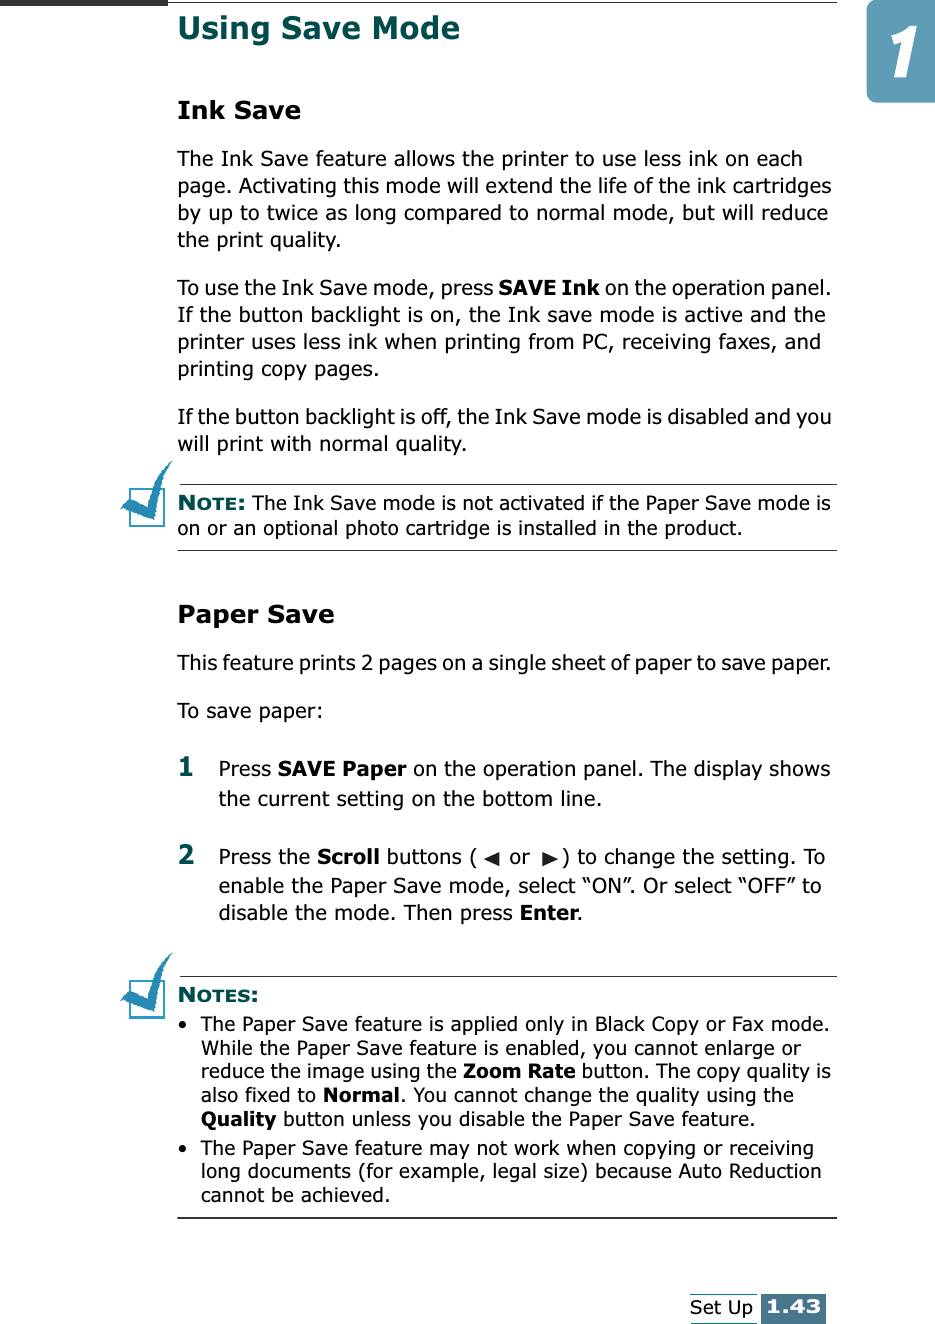 1.43Set UpUsing Save ModeInk SaveThe Ink Save feature allows the printer to use less ink on each page. Activating this mode will extend the life of the ink cartridges by up to twice as long compared to normal mode, but will reduce the print quality. To use the Ink Save mode, press SAVE Ink on the operation panel. If the button backlight is on, the Ink save mode is active and the printer uses less ink when printing from PC, receiving faxes, and printing copy pages.If the button backlight is off, the Ink Save mode is disabled and you will print with normal quality.NOTE: The Ink Save mode is not activated if the Paper Save mode is on or an optional photo cartridge is installed in the product.Paper SaveThis feature prints 2 pages on a single sheet of paper to save paper. To save paper:1Press SAVE Paper on the operation panel. The display shows the current setting on the bottom line.2Press the Scroll buttons (  or  ) to change the setting. To enable the Paper Save mode, select “ON”. Or select “OFF” to disable the mode. Then press Enter.NOTES: • The Paper Save feature is applied only in Black Copy or Fax mode. While the Paper Save feature is enabled, you cannot enlarge or reduce the image using the Zoom Rate button. The copy quality is also fixed to Normal. You cannot change the quality using the Quality button unless you disable the Paper Save feature.• The Paper Save feature may not work when copying or receiving long documents (for example, legal size) because Auto Reduction cannot be achieved.